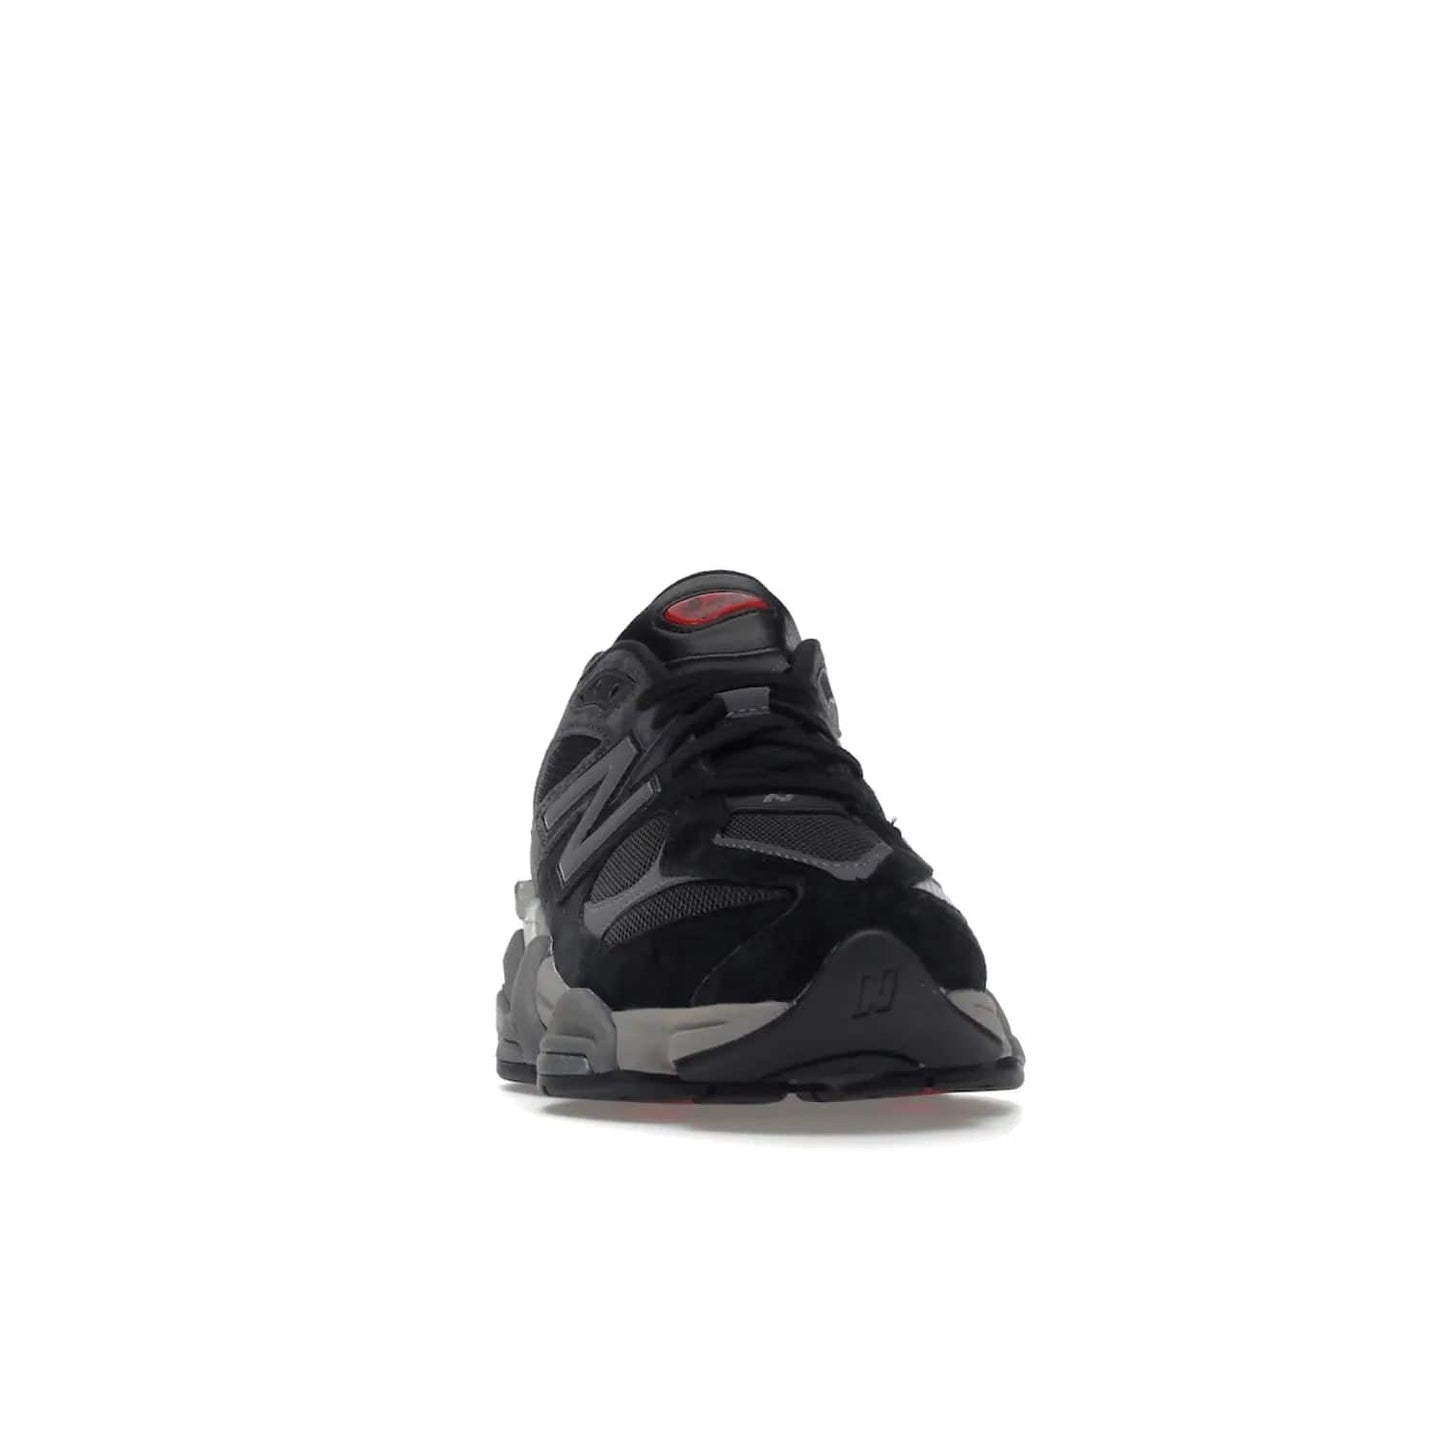 New Balance 9060 Black Castlerock Grey - Image 9 - Only at www.BallersClubKickz.com - New Balance 9060: Inspired by a 90s classic - black mesh upper with pigskin suede and leather overlays, "N" branding, CR device heel, chunky dual-density midsole with ABZORB and SBS cushioning technology, released in September 2022 at a retail price of $150.